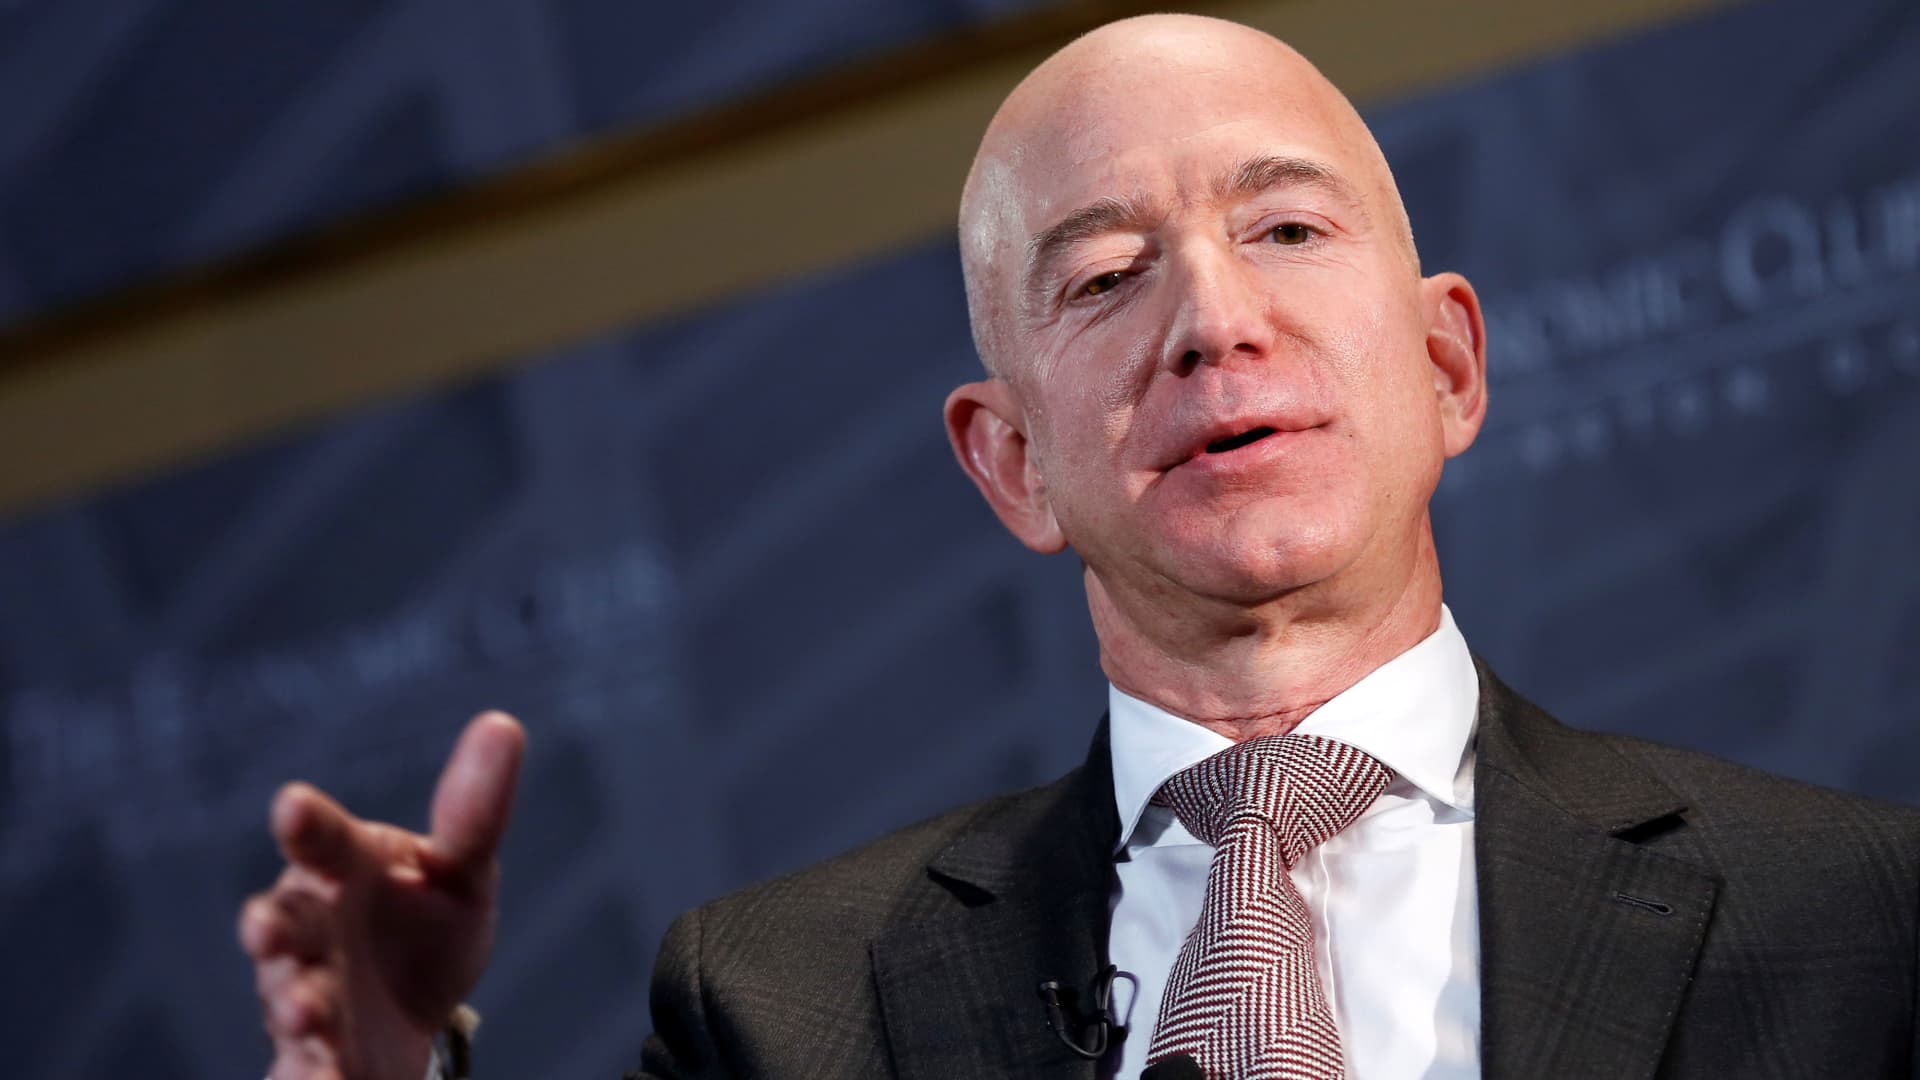 Amazon is aggressively blocking ads for unprofitable products as part of a plan to bolster its bottom line